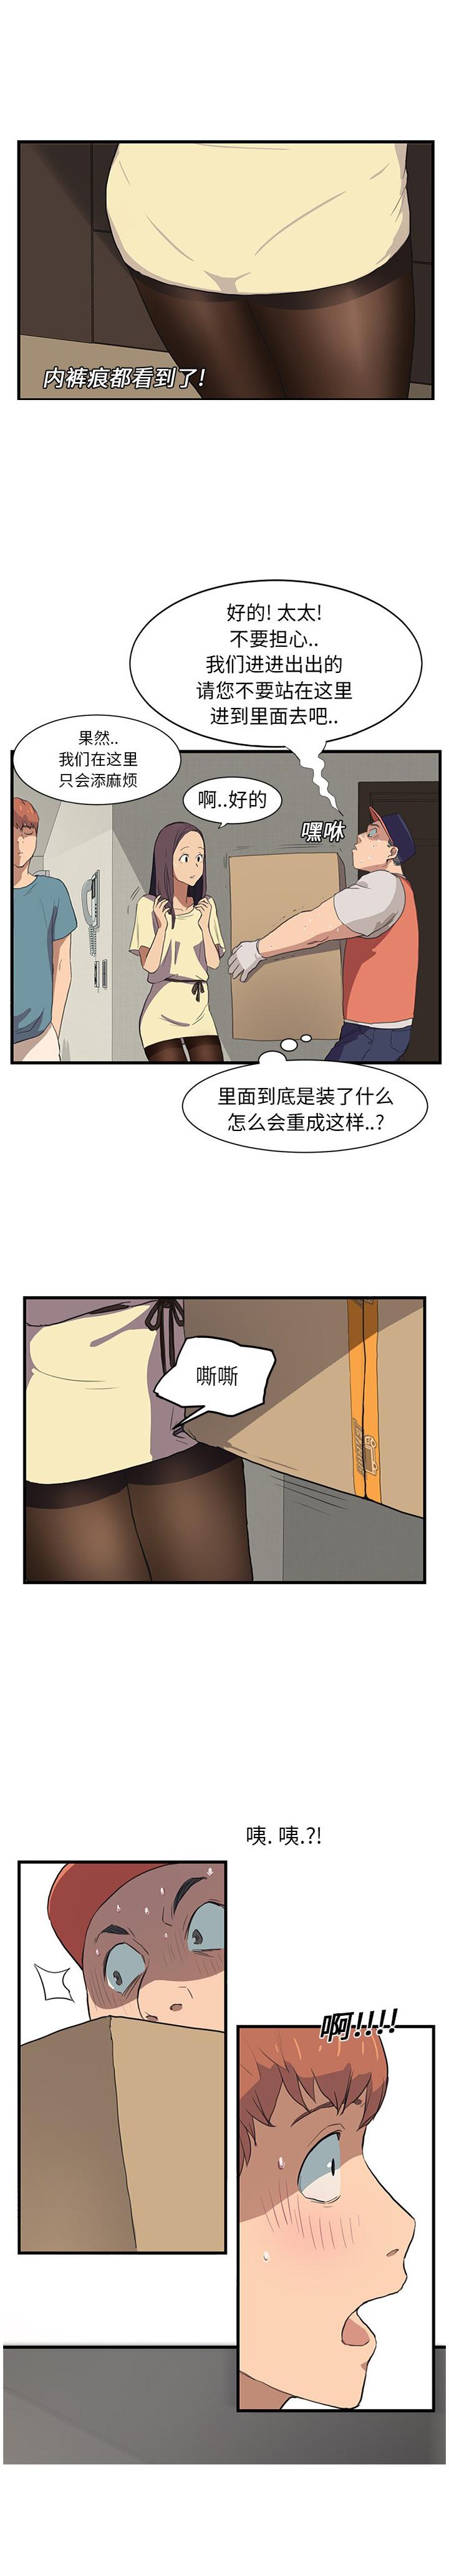 Load 继母 1-8 Chinese Scandal - Page 11